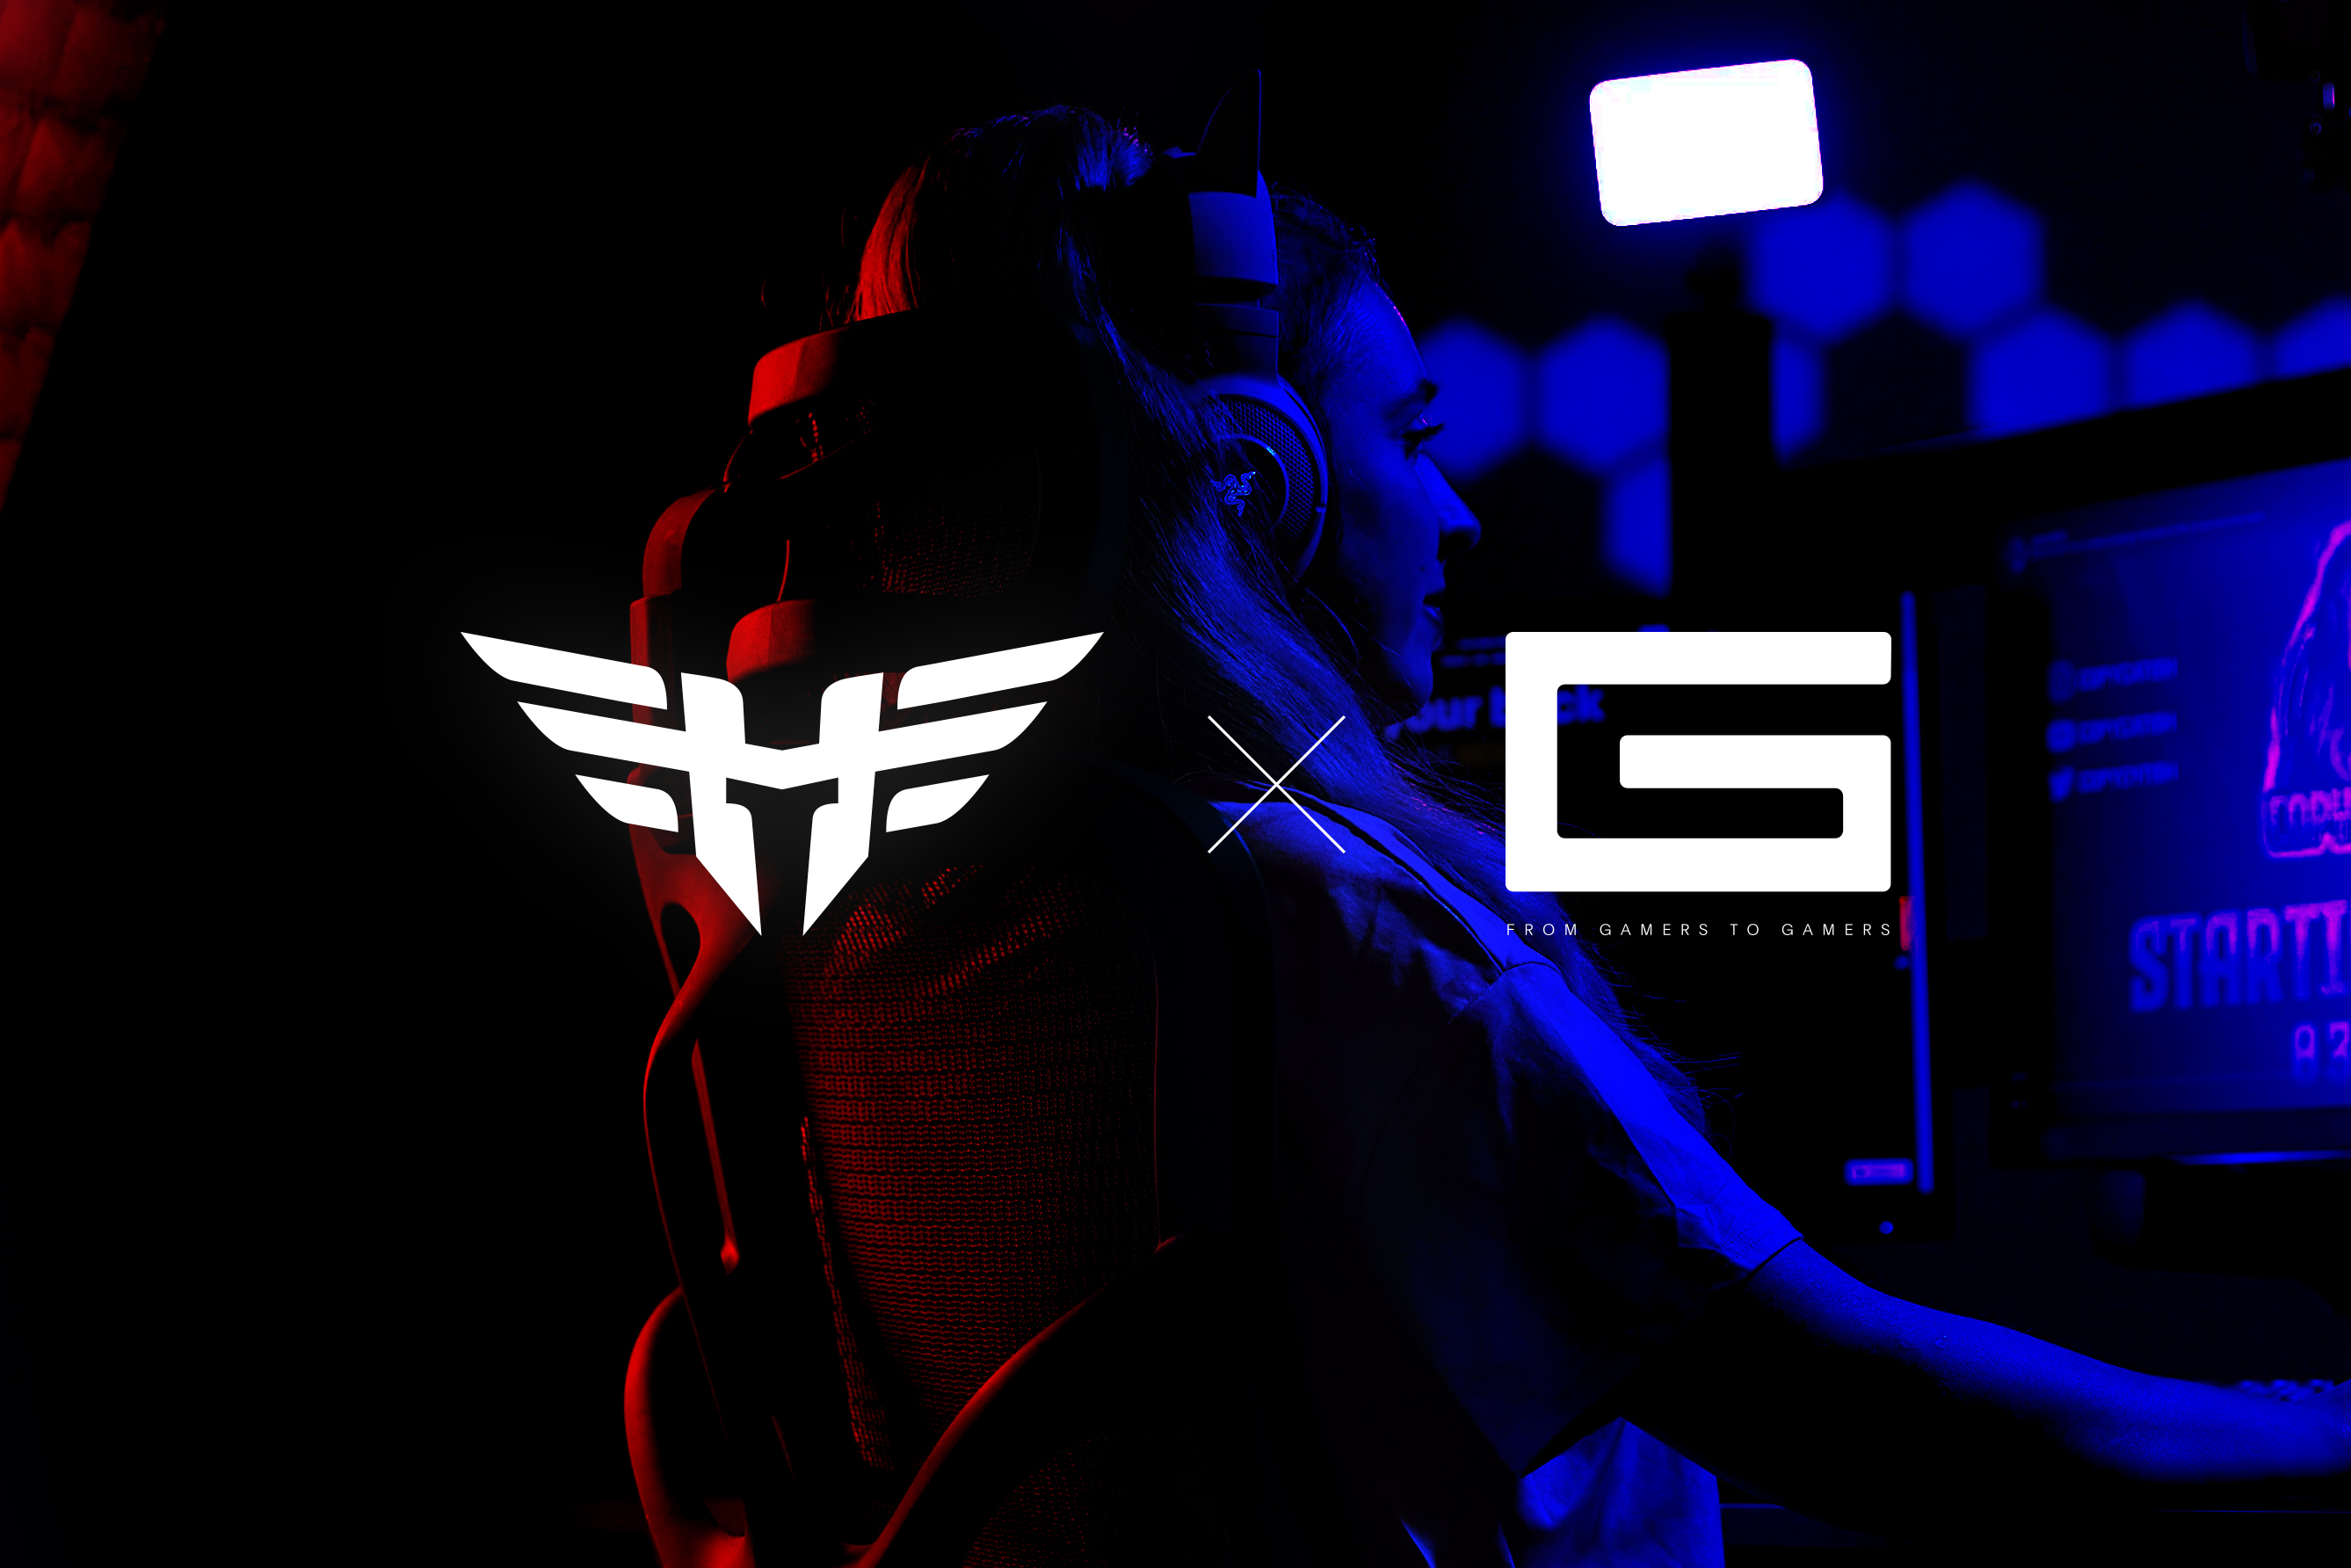 Heroic has partnered with Gsign –